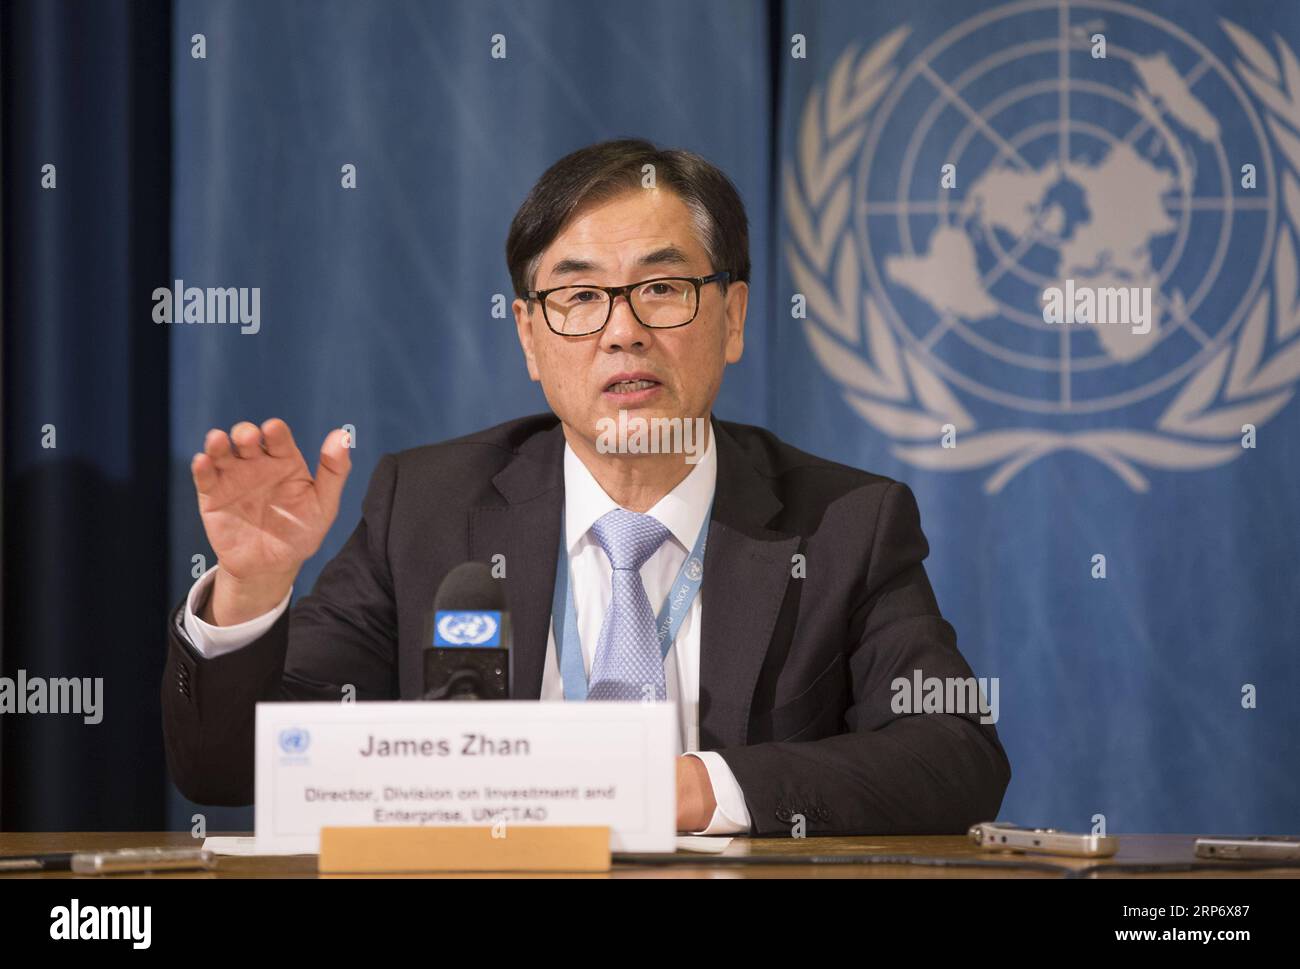 (190122) -- GENEVA, Jan. 22, 2019 -- James Zhan, director of Investment and Enterprise of the UN Conference on Trade and Development (UNCTAD) attends the release conference of 2019 Investment Trends Monitor in Geneva, Switzerland, Jan. 18, 2019. Global foreign direct investment (FDI) flows continue their slide in 2018, a United Nations agency said Monday while noting that China, however, bucked that trend and was the largest investment recipient in the world. Global FDI fell by 19 percent in 2018 to an estimated 1.2 trillion U.S. dollars from 1.47 trillion dollars in 2017, said UNCTAD. ) SWITZ Stock Photo